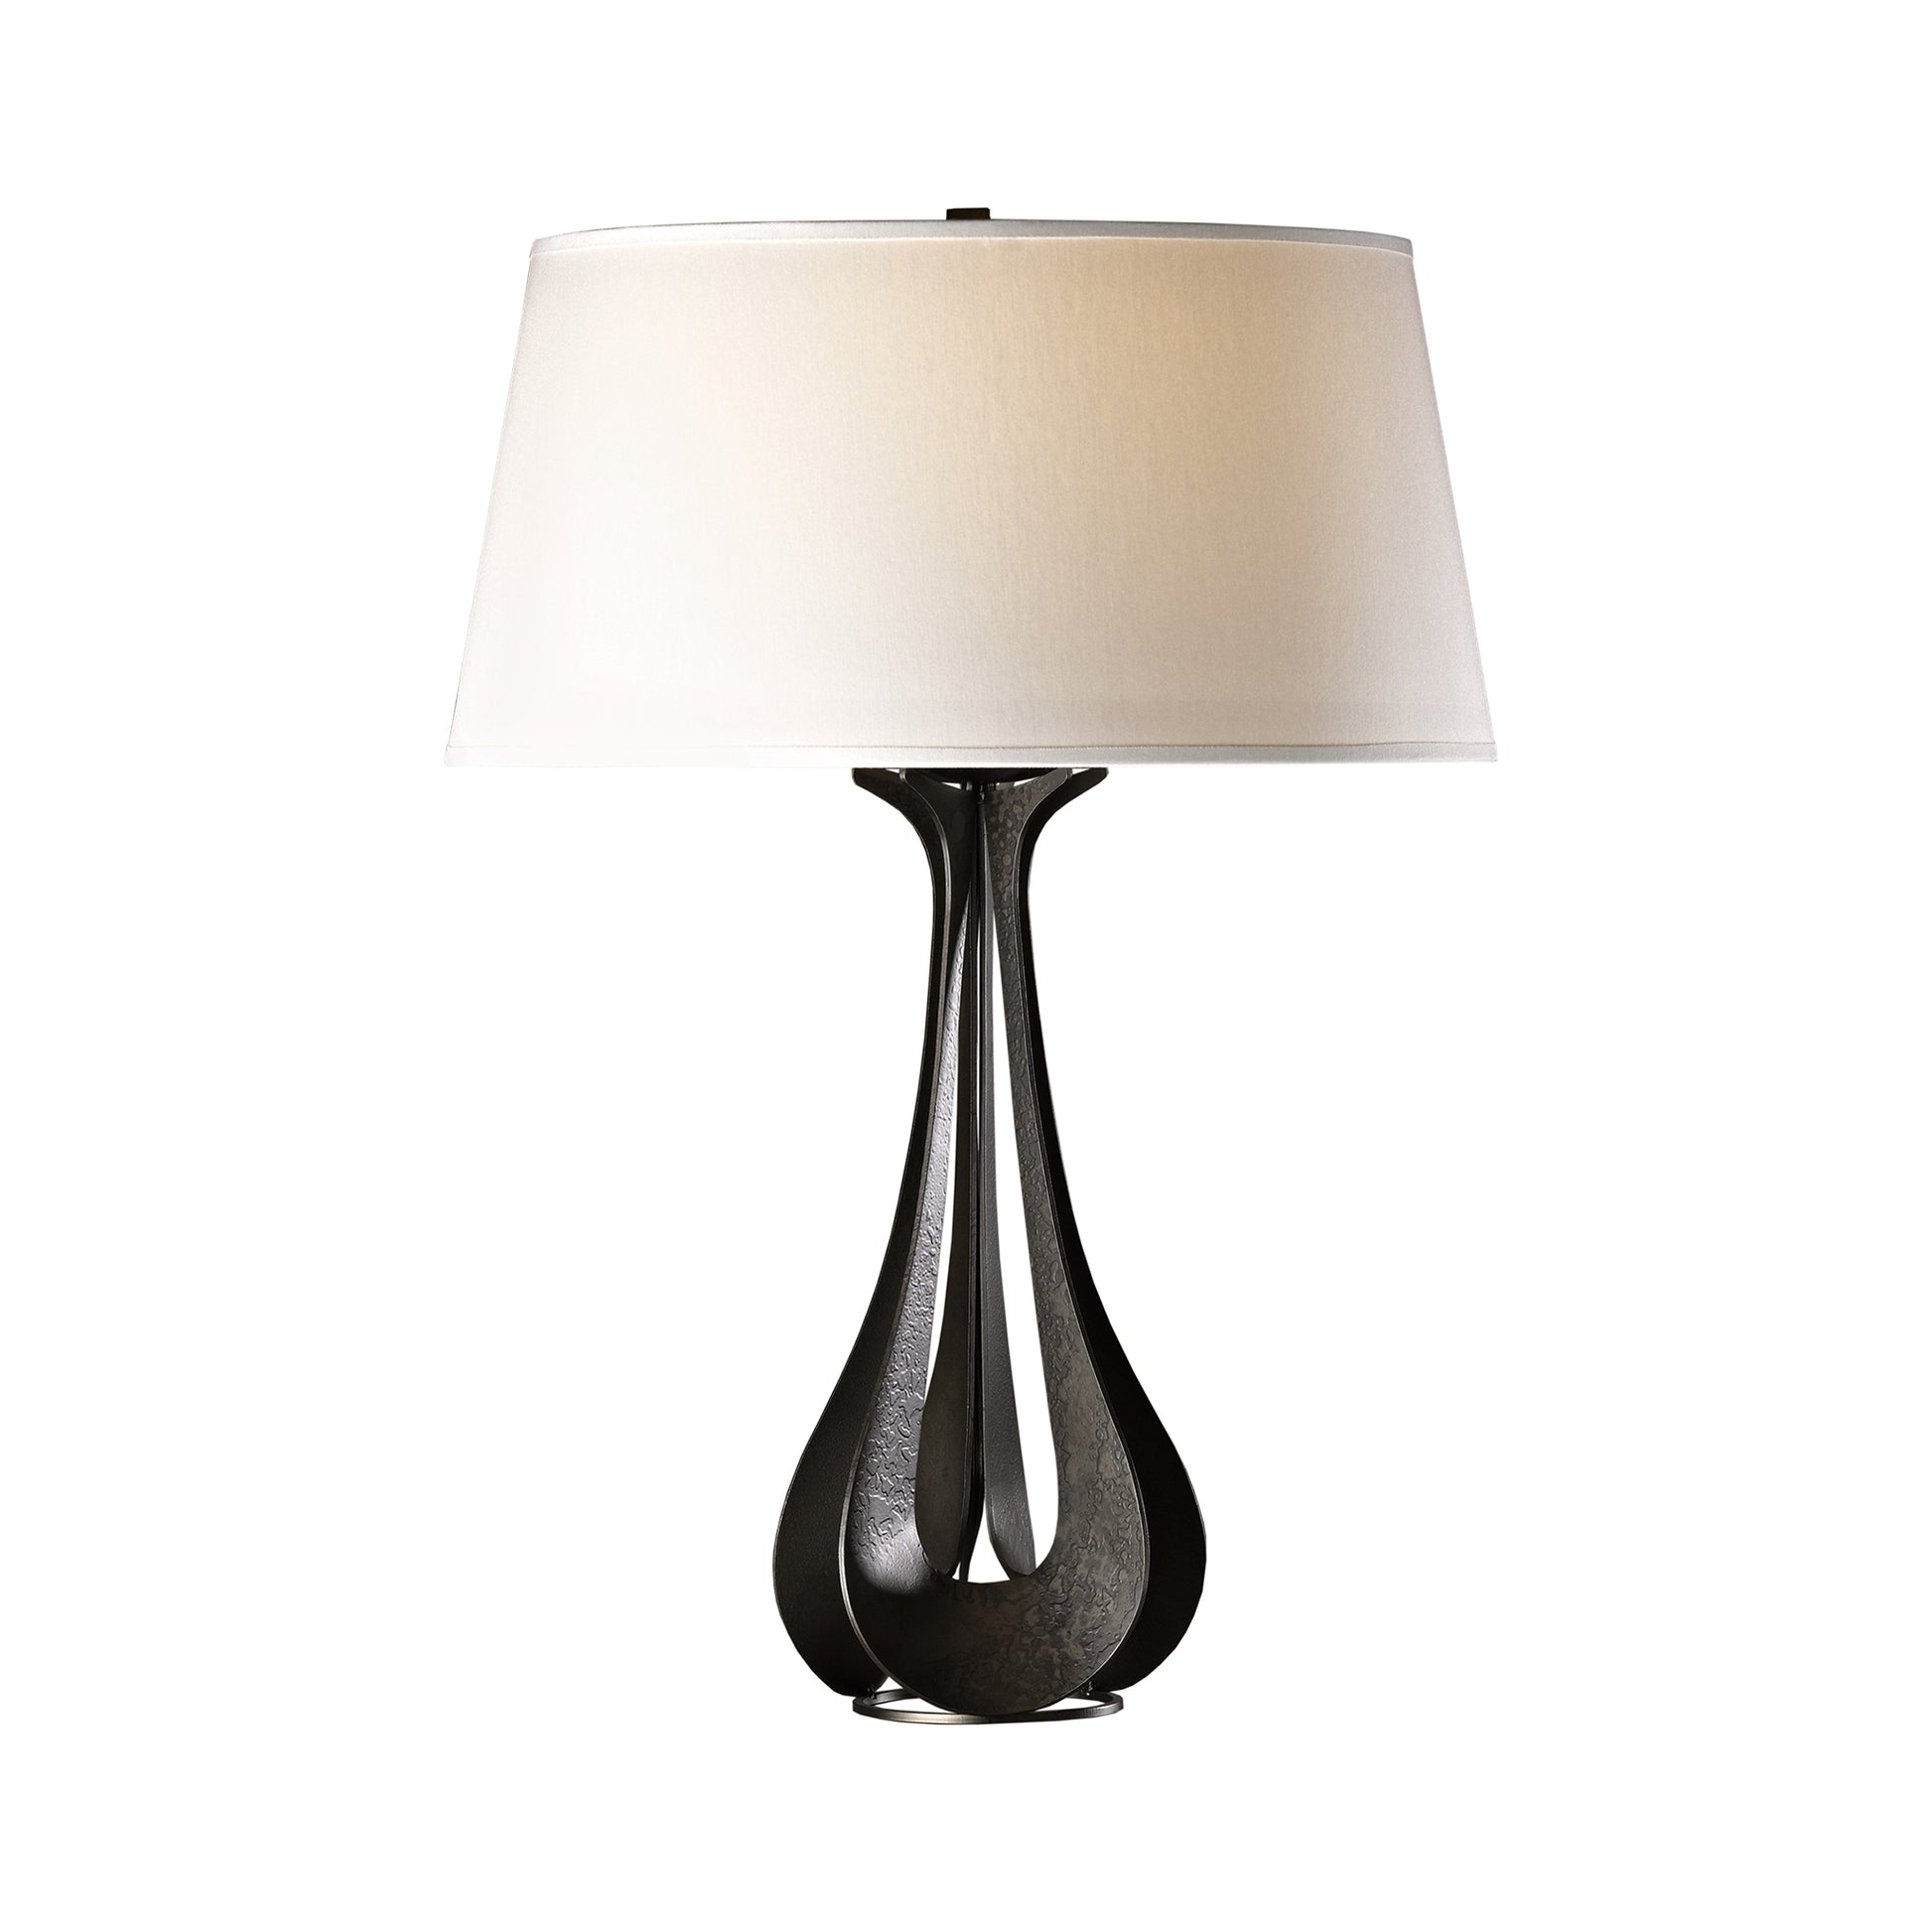 Elegant Lino #2 table lamp by Hubbardton Forge with a white cylindrical shade and a unique hand-forged black metal finish base that features a graceful, elongated teardrop design. The base has a textured inner surface.